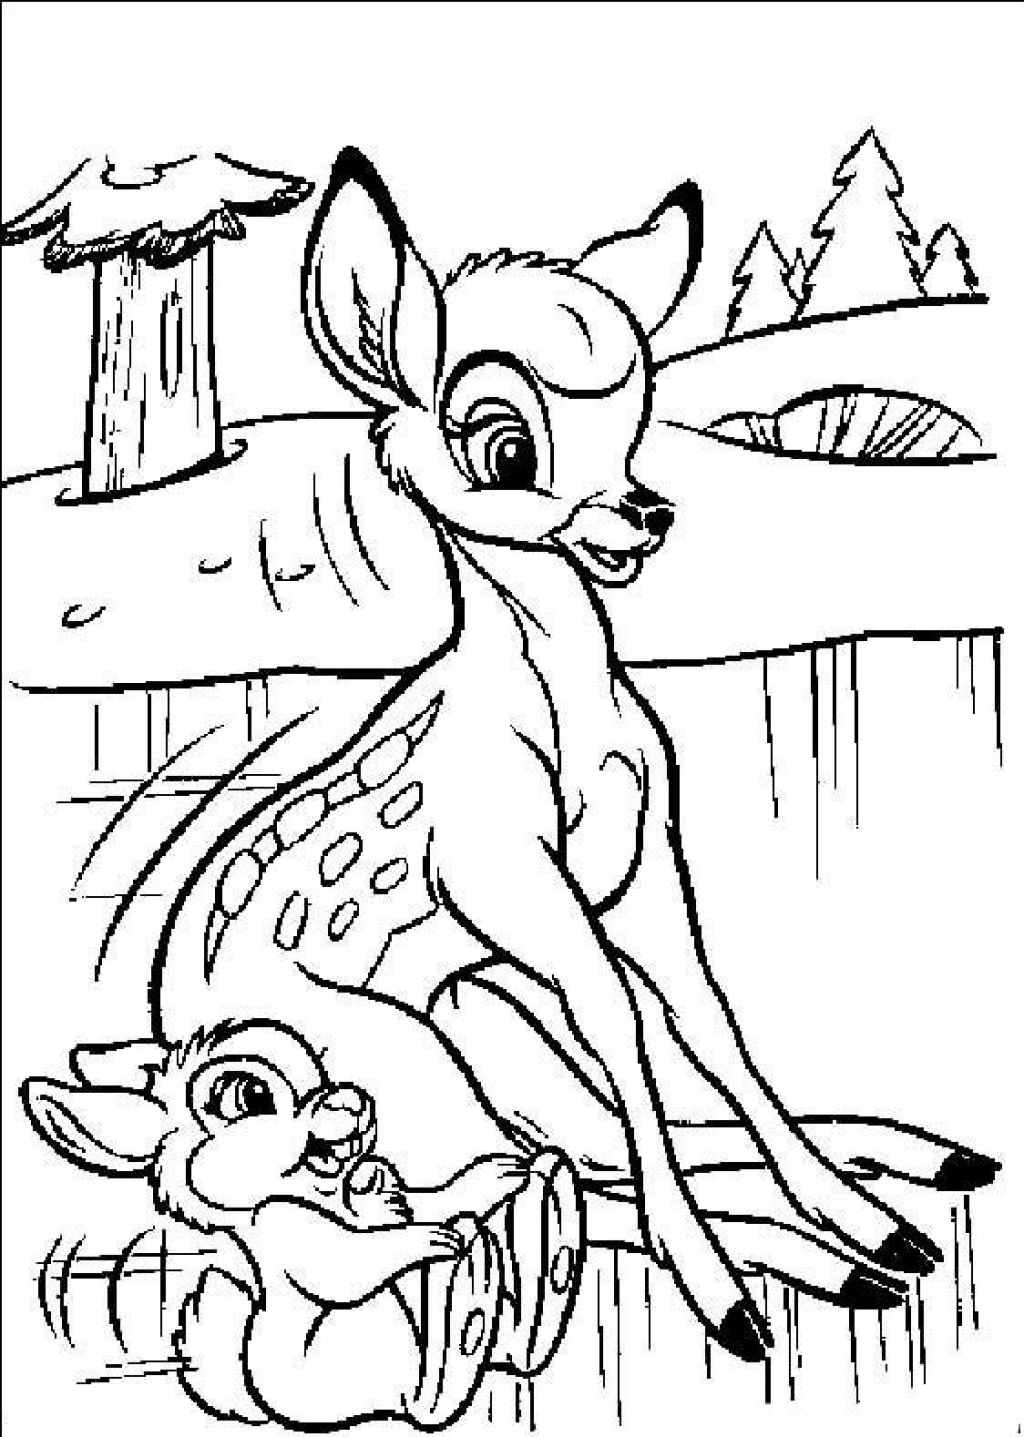 Get your crayons and markers ready to color this Bambi coloring page